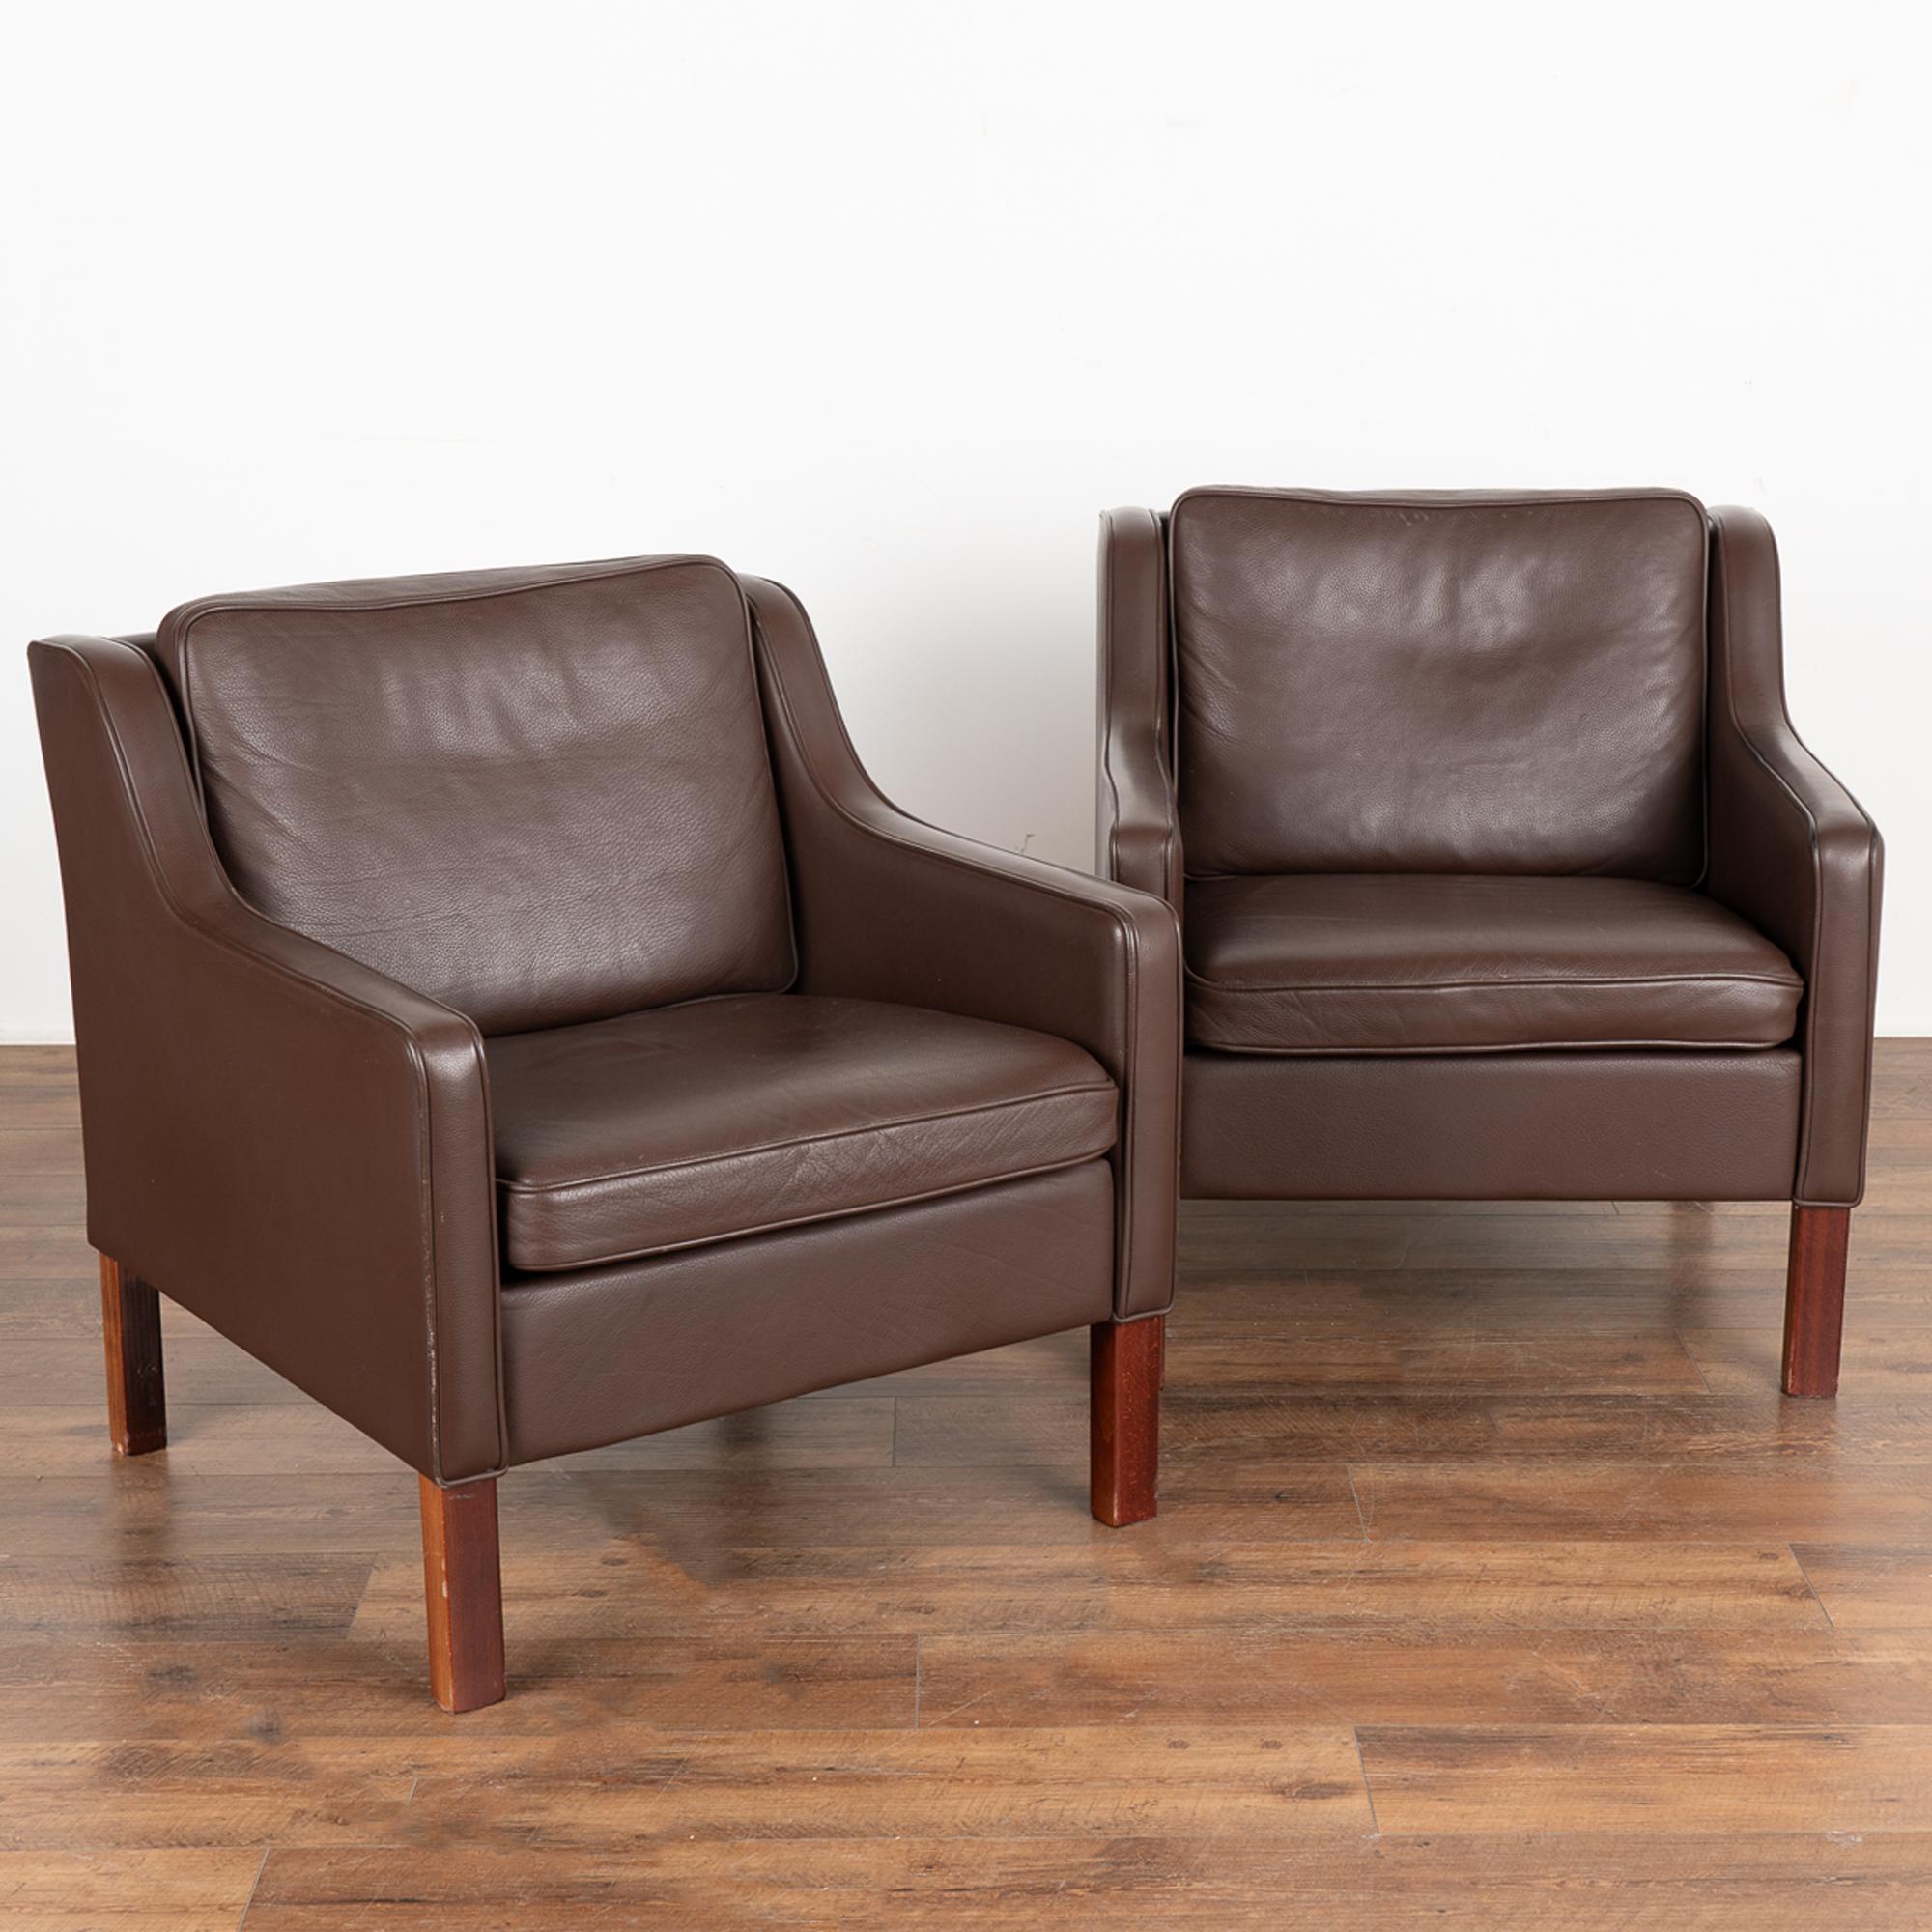 Pair, Mid-Century Modern brown leather arm chairs.
Clean modern design with squared arms, these chairs sit comfortably on hard wood feet.
Sold in vintage used condition. Leather shows typical signs of wear including scuffs, scratches, minor